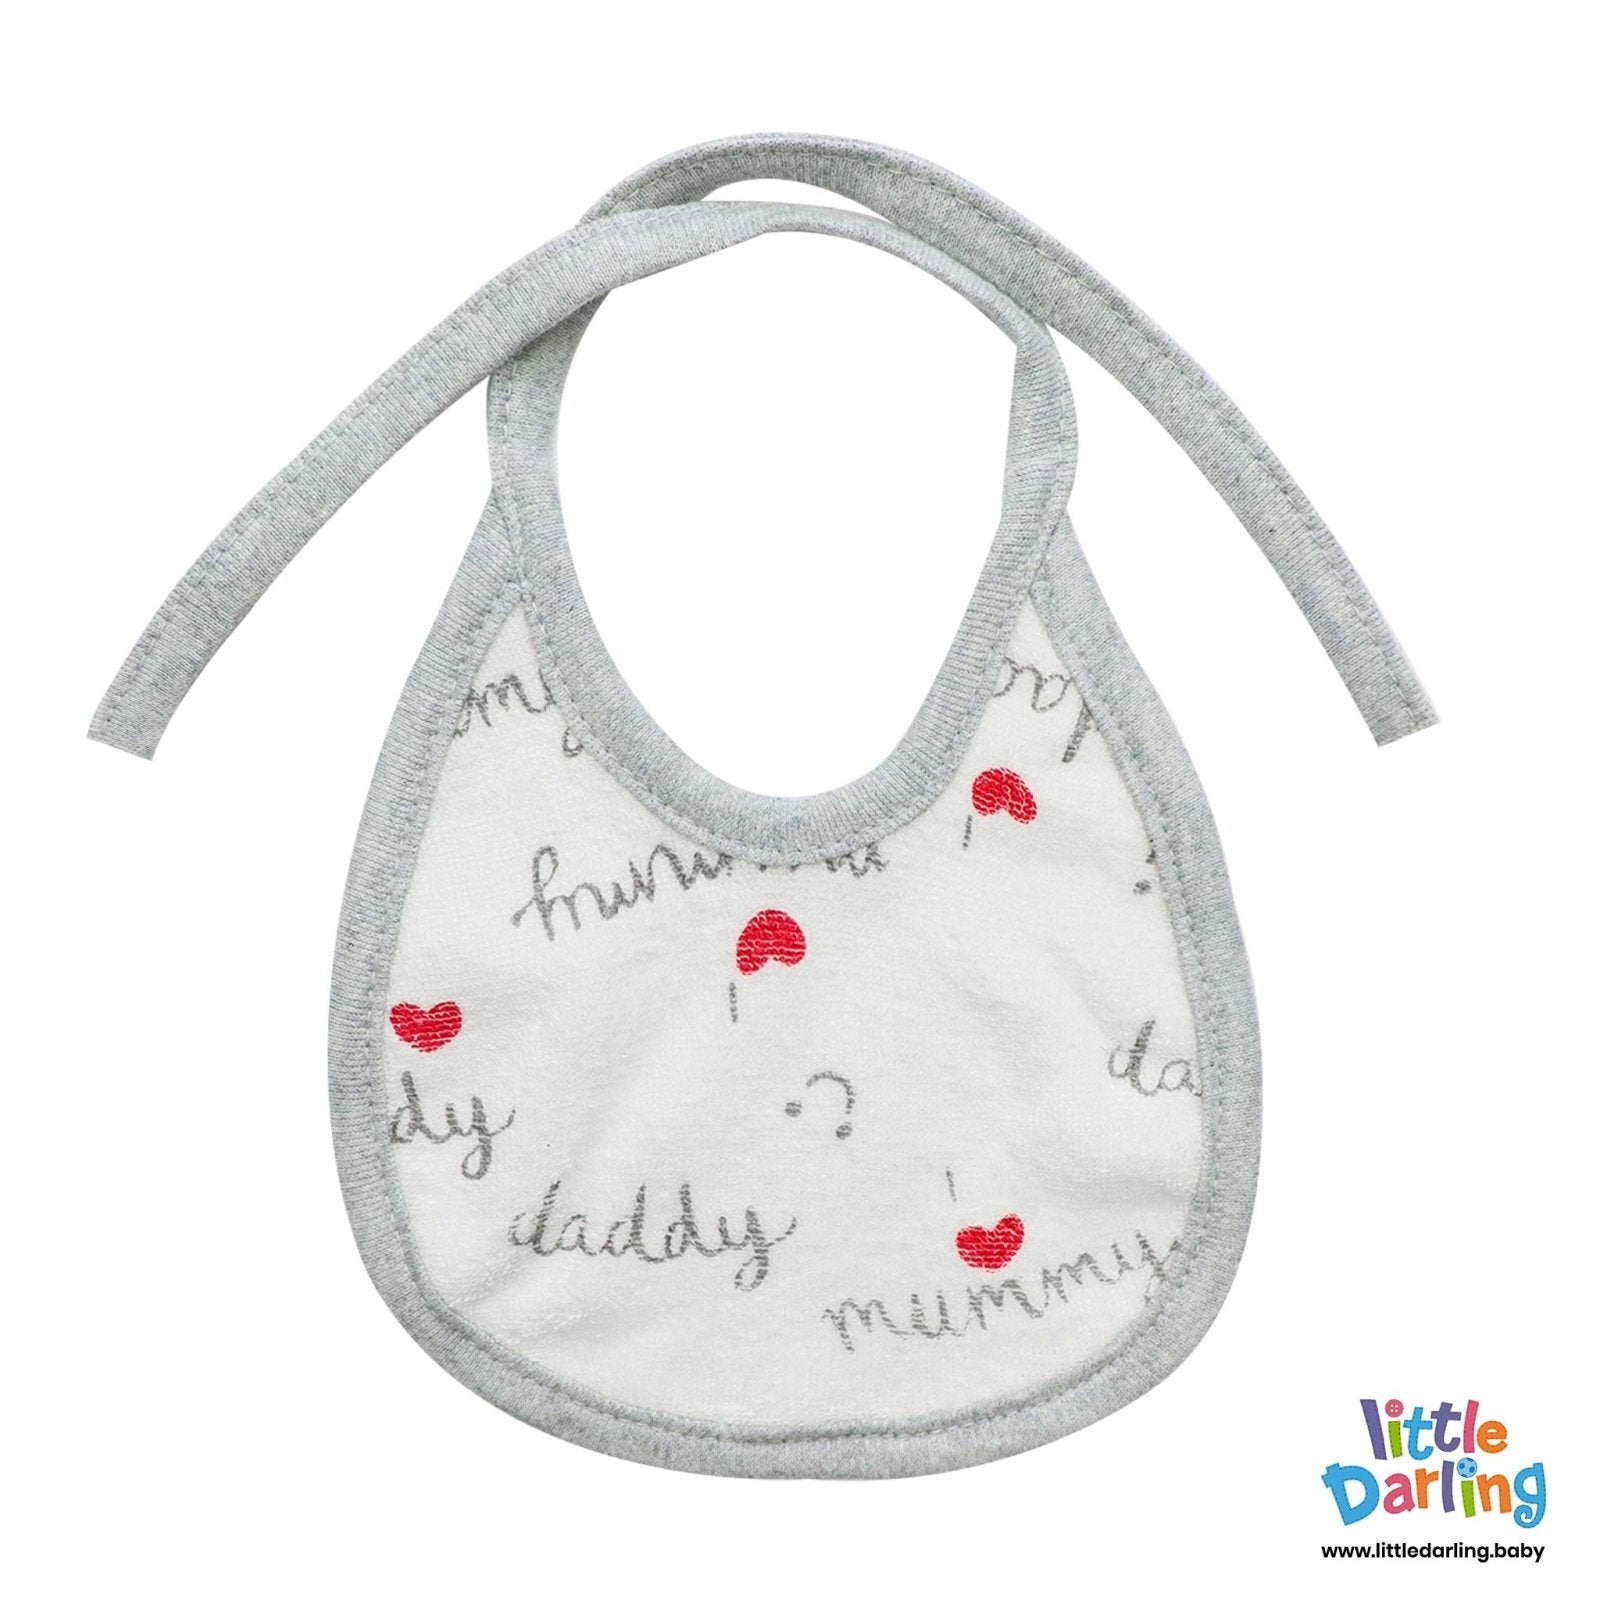 I Love Mummy Daddy Printed Pack of 5 Bibs by Little Darling